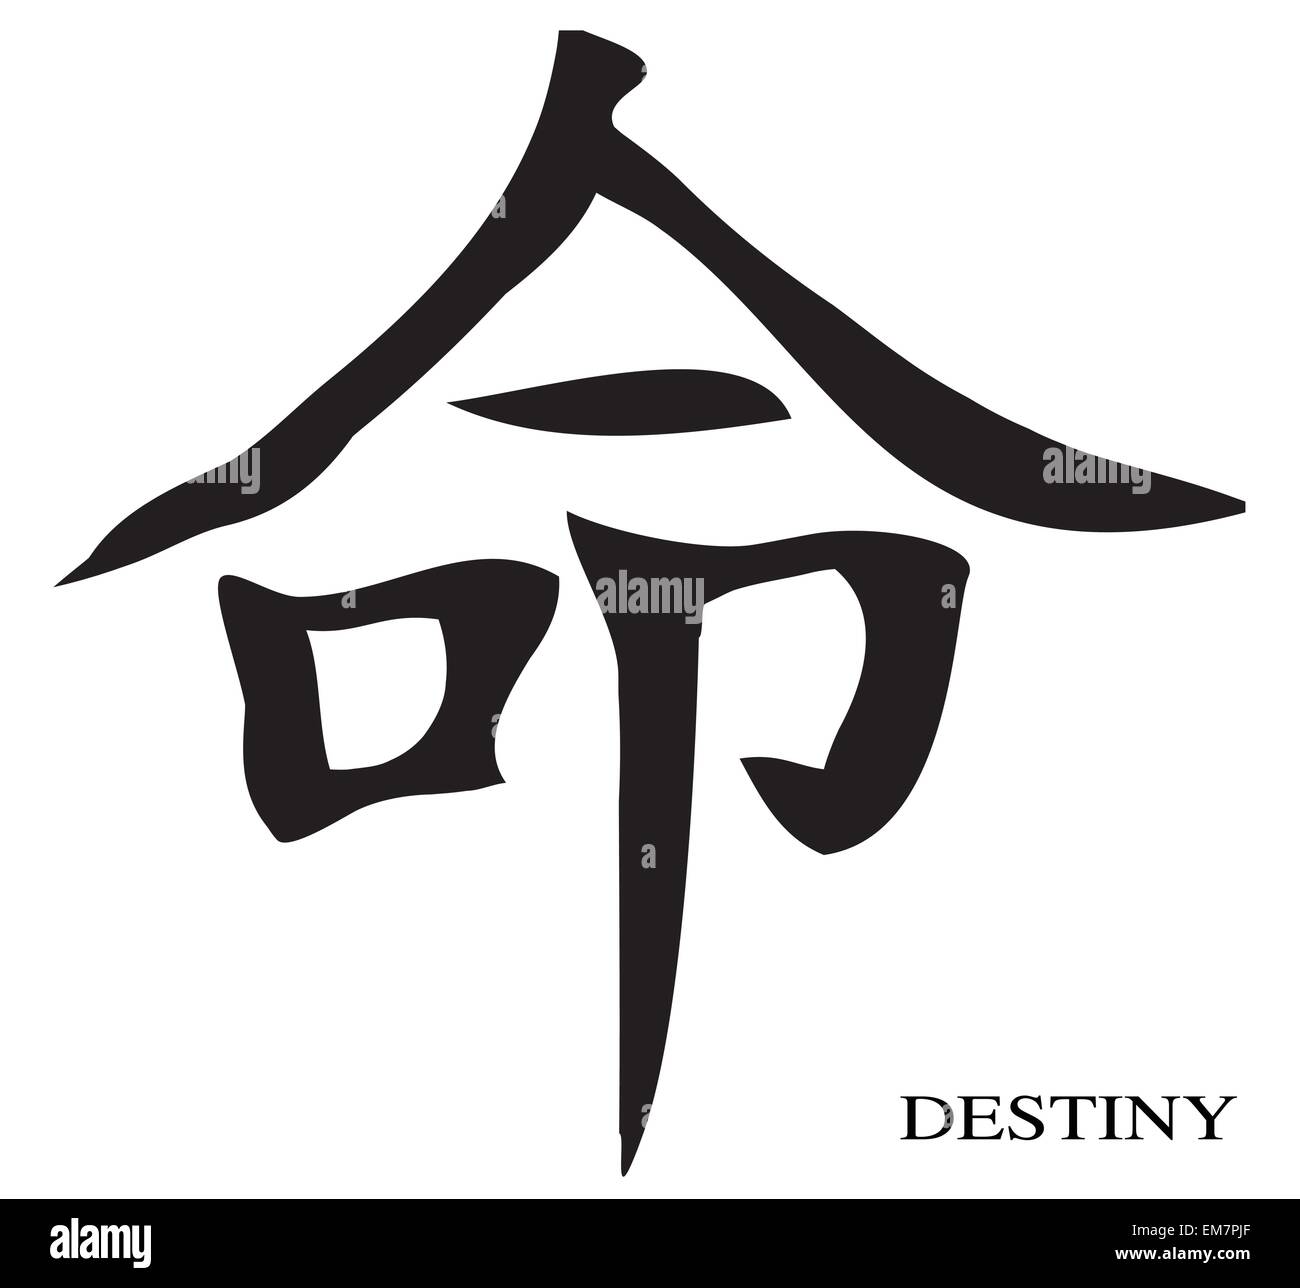 Destiny Chinese Character Stock Vector